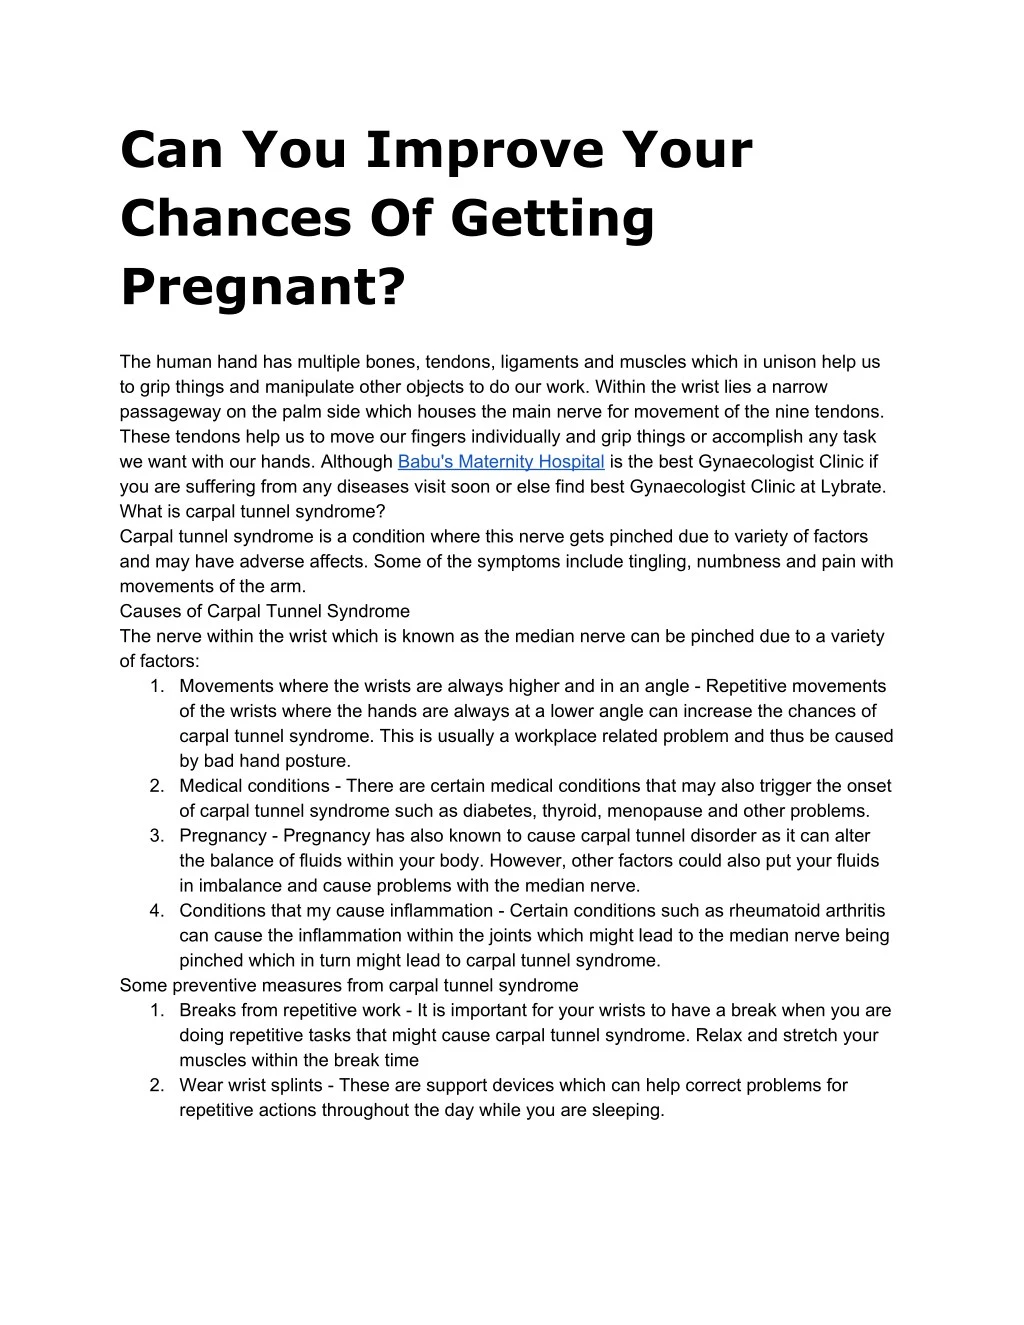 can you improve your chances of getting pregnant